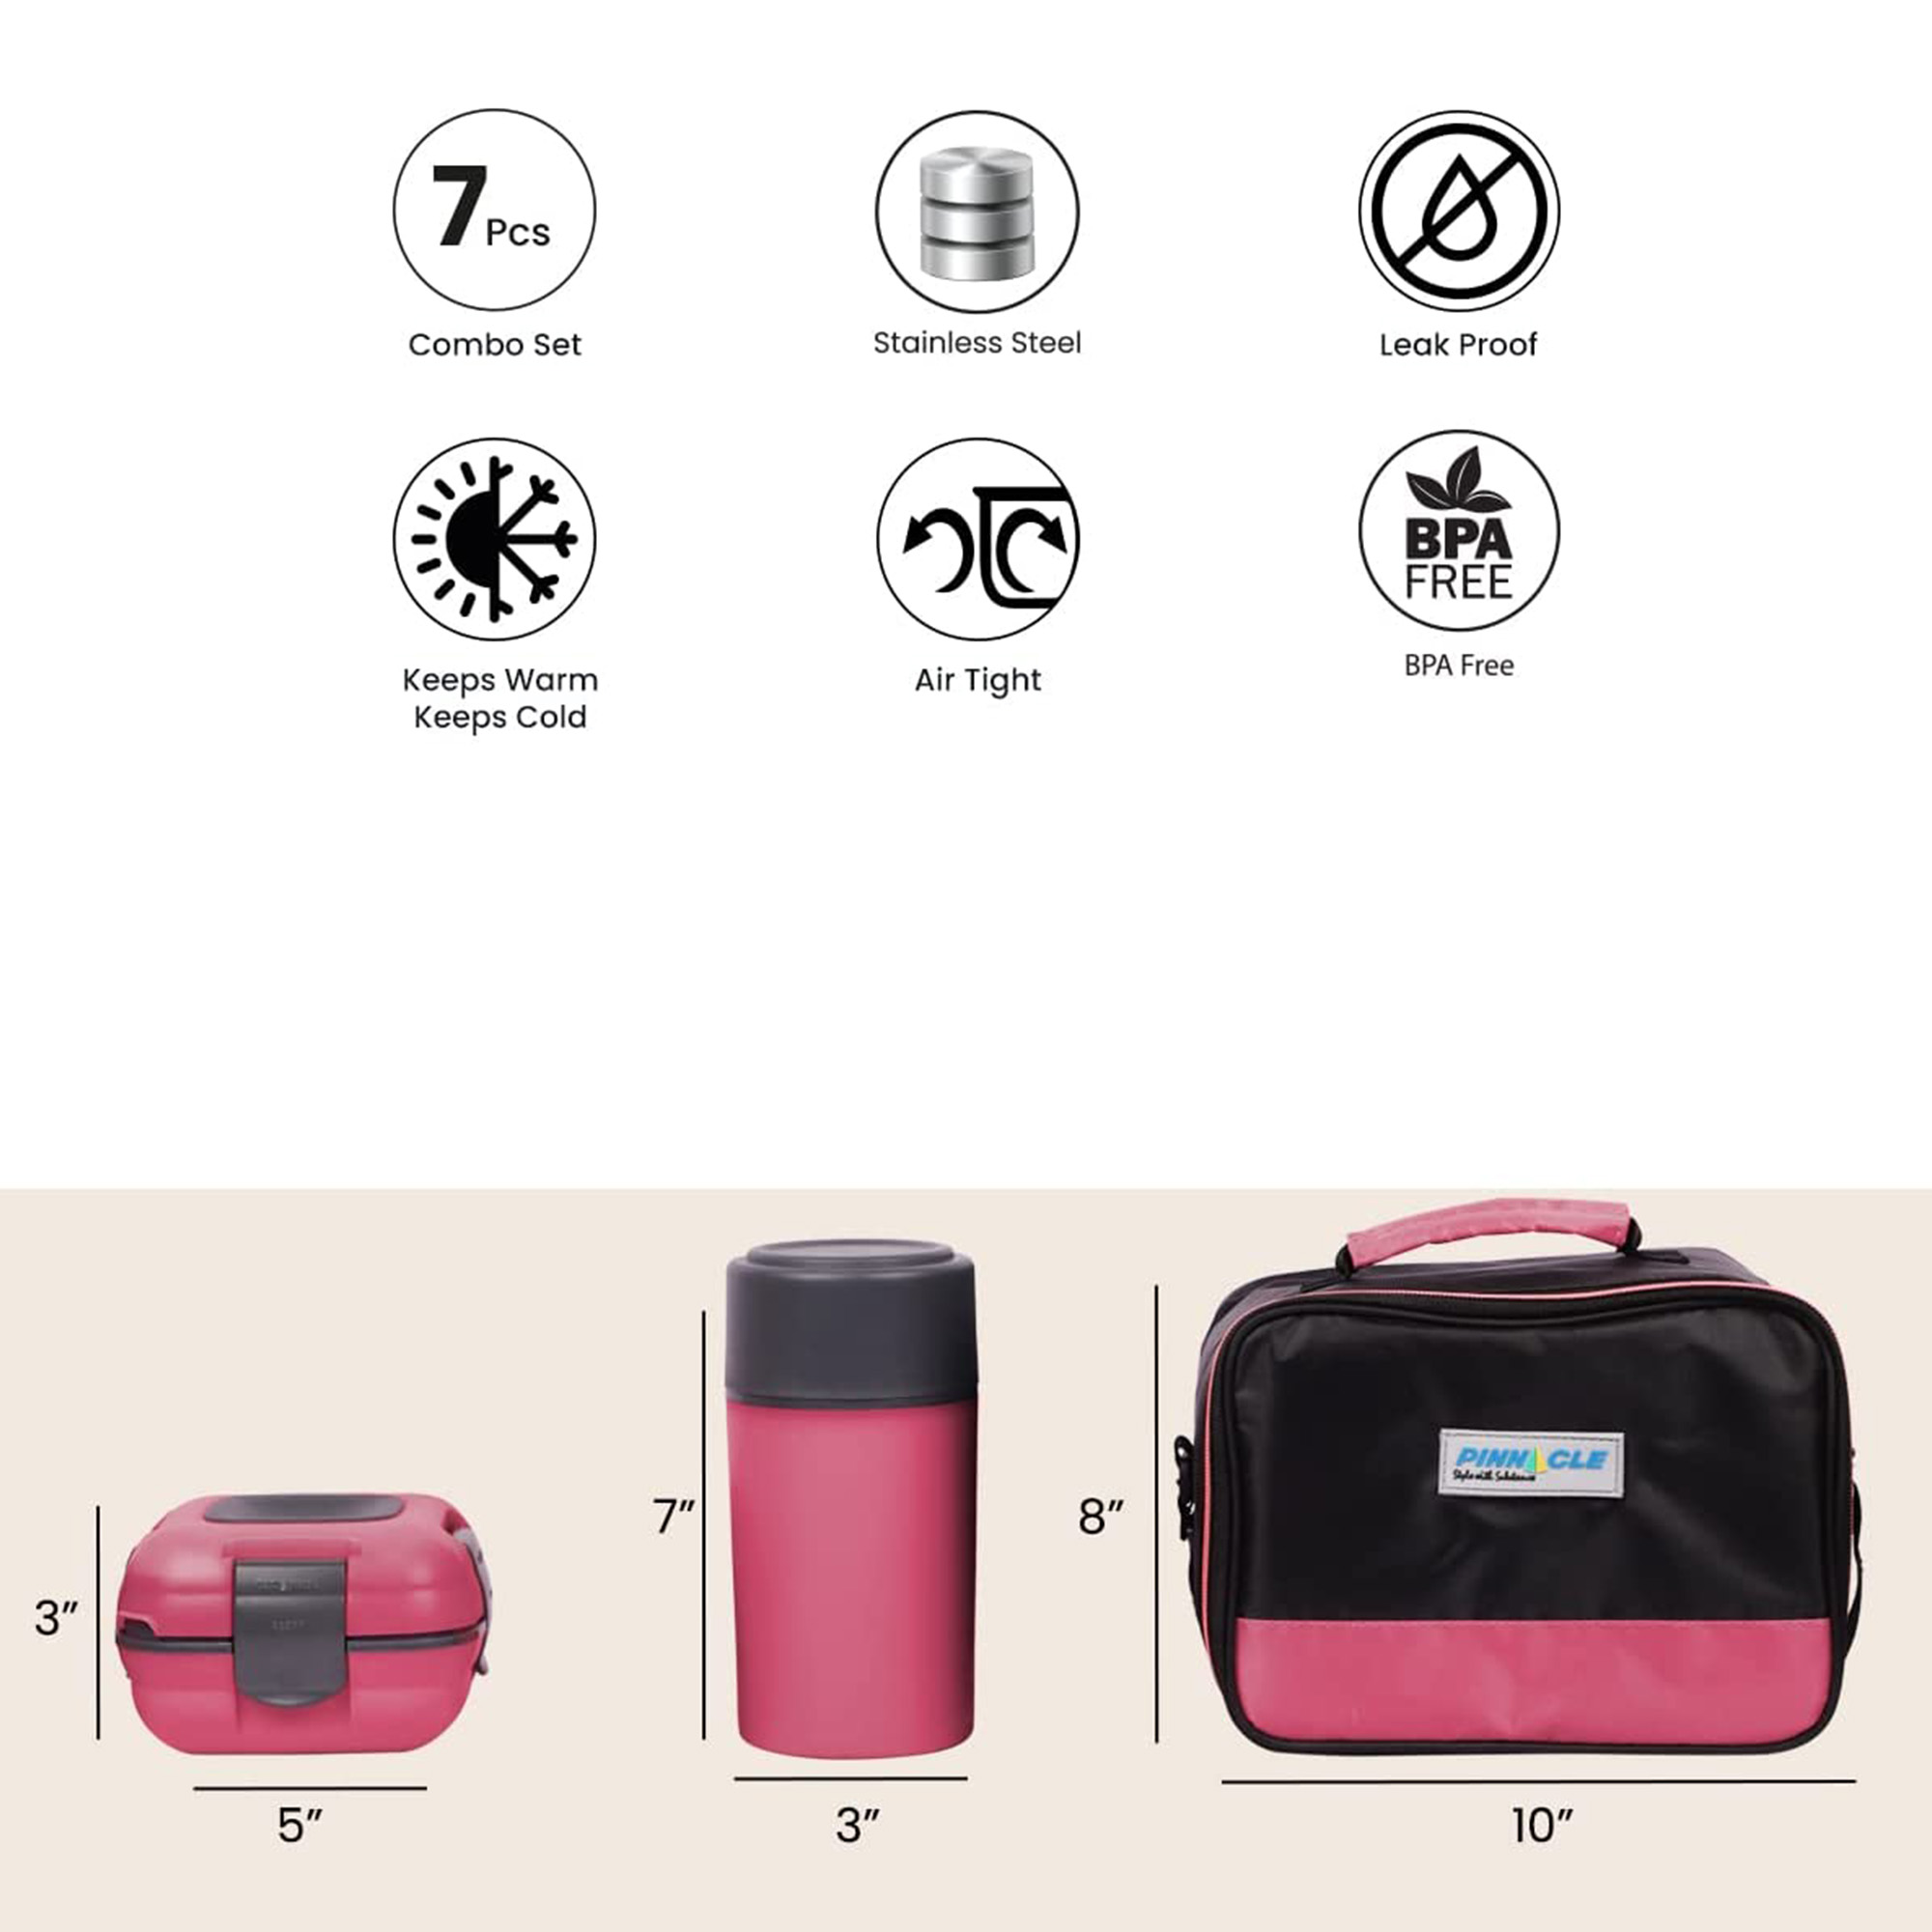 Pinnacle Thermoware Thermal Lunch Box Set Lunch Containers for Adults & Kids, Pink - image 5 of 9